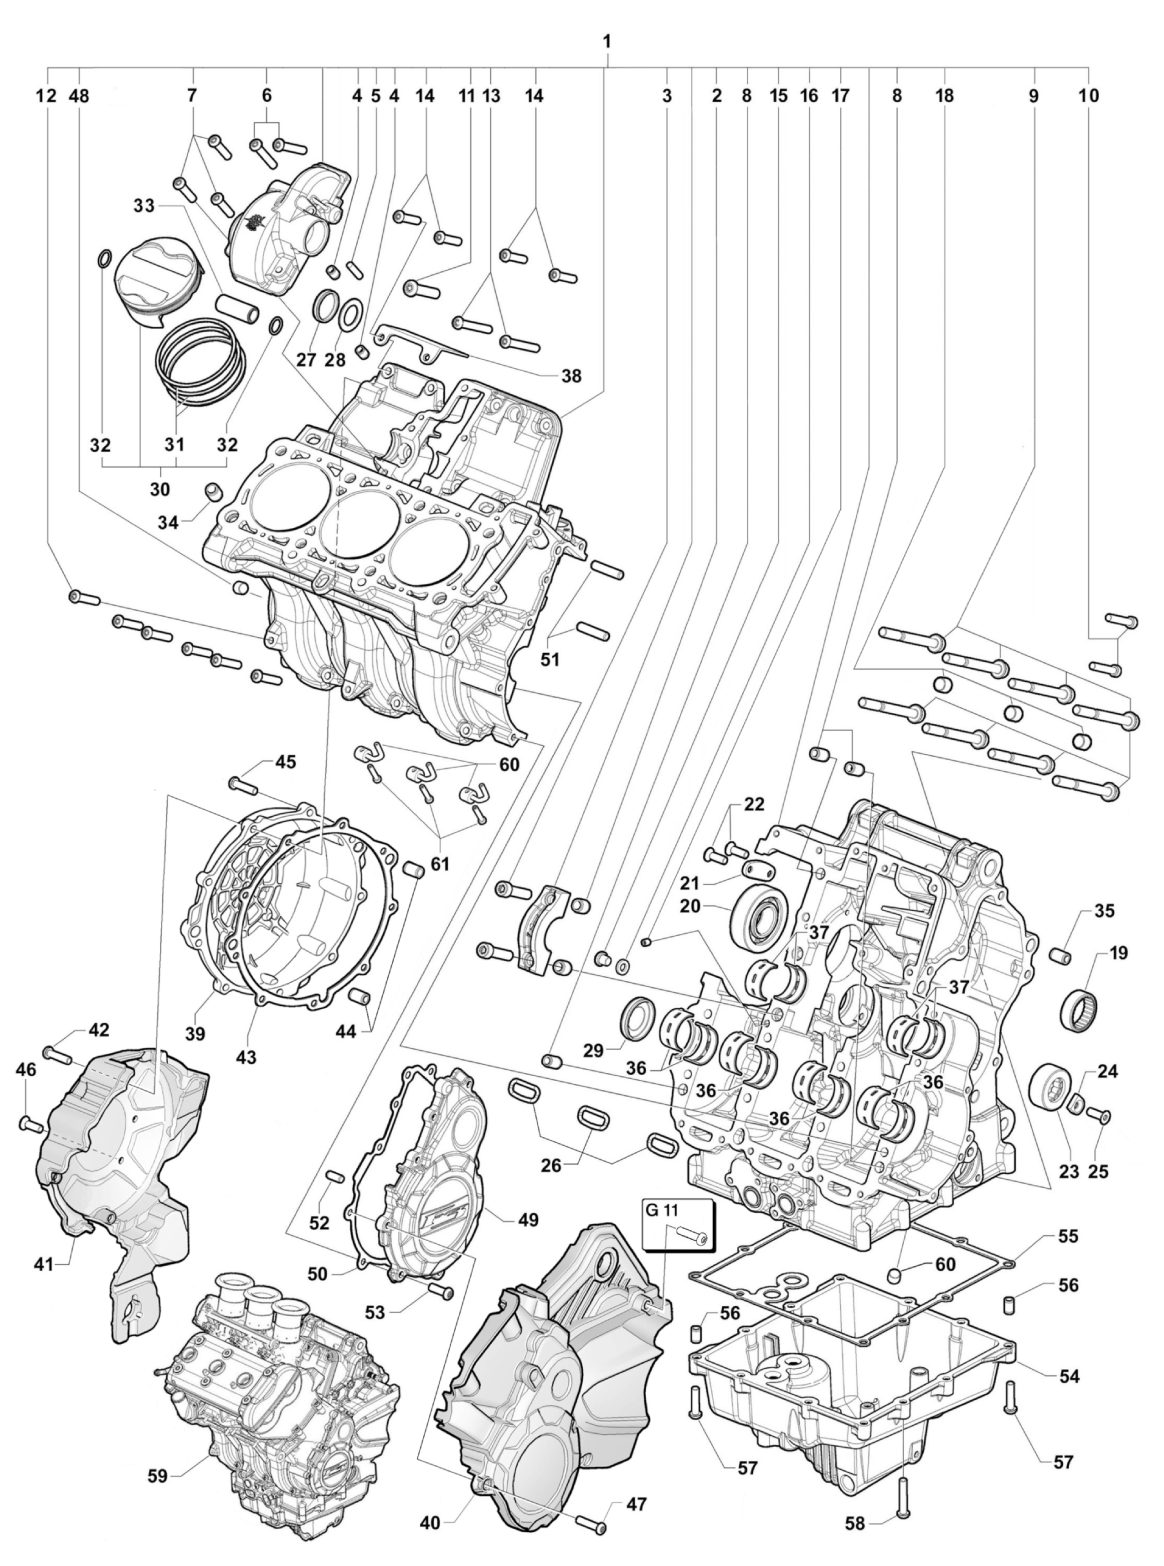 Crankcase And Cylinder Assembly


